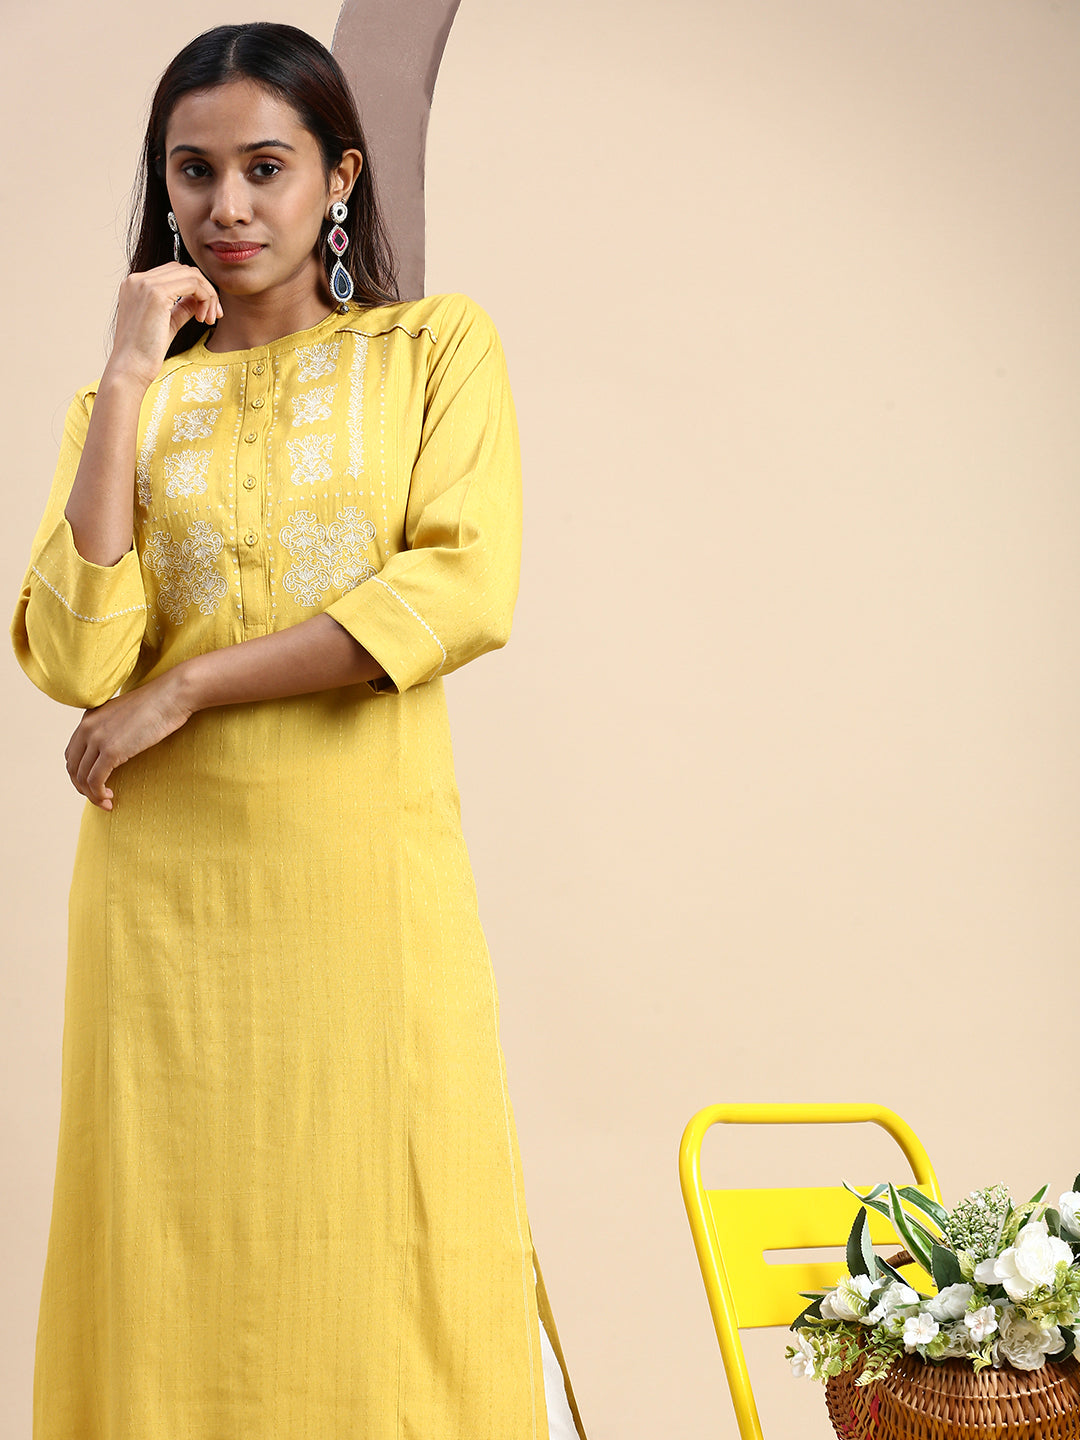 Roopa's Collection - Price Rs 559 + 100 SHIPPING Trendy Slub Cotton Kurti  Fabric: Slub Cotton, Inner: Cotton Sleeves: Sleeves Are Included Size: M-  38 in, L- 40 in, XL- 42 in,